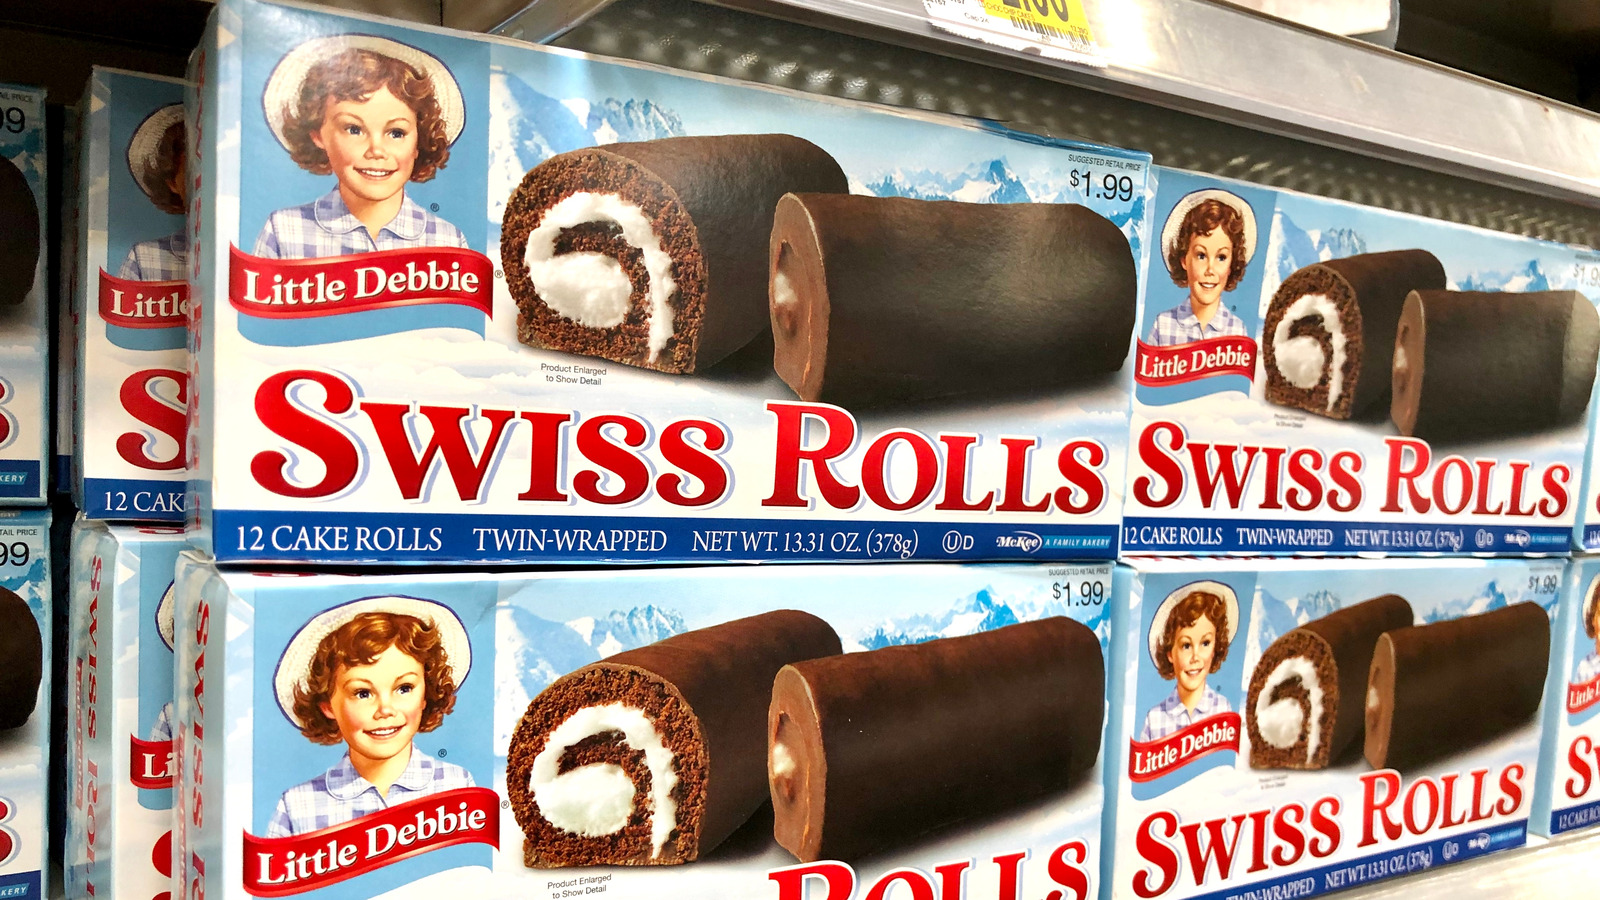 Here's What Happened To The Real Little Debbie - Mashed